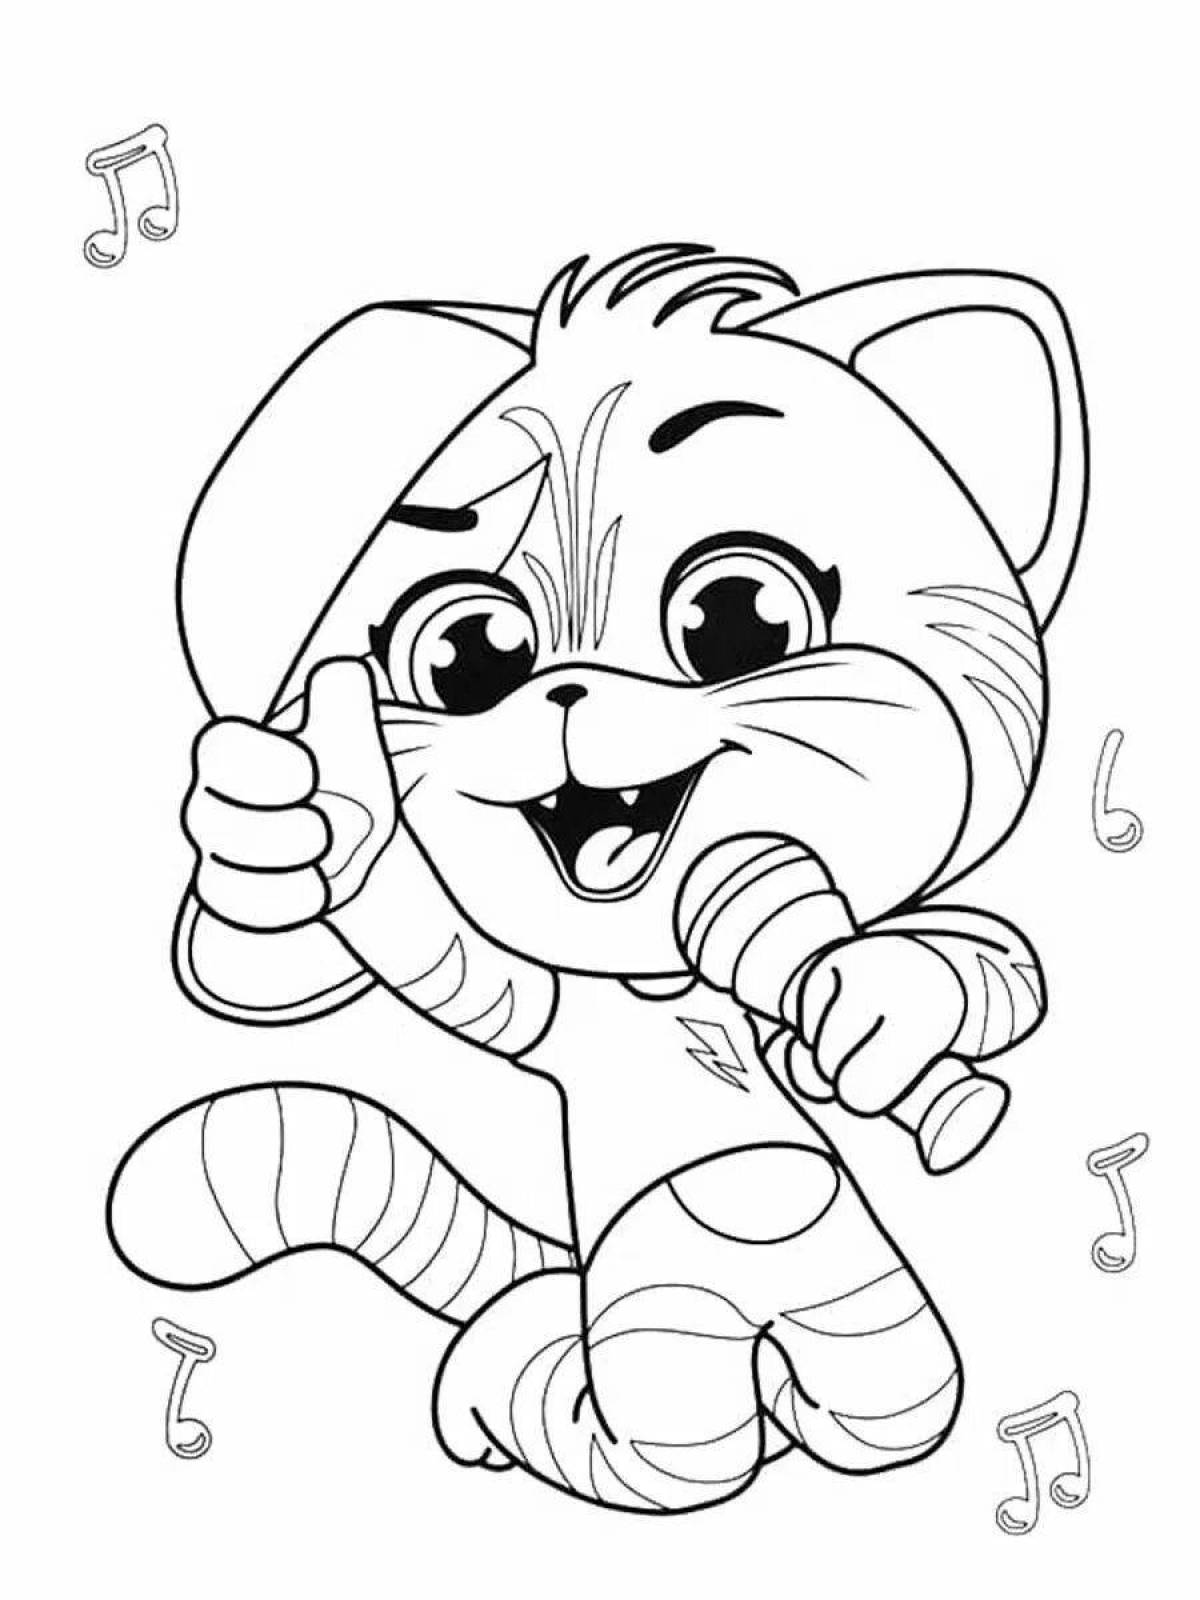 Charming mrr meow coloring book